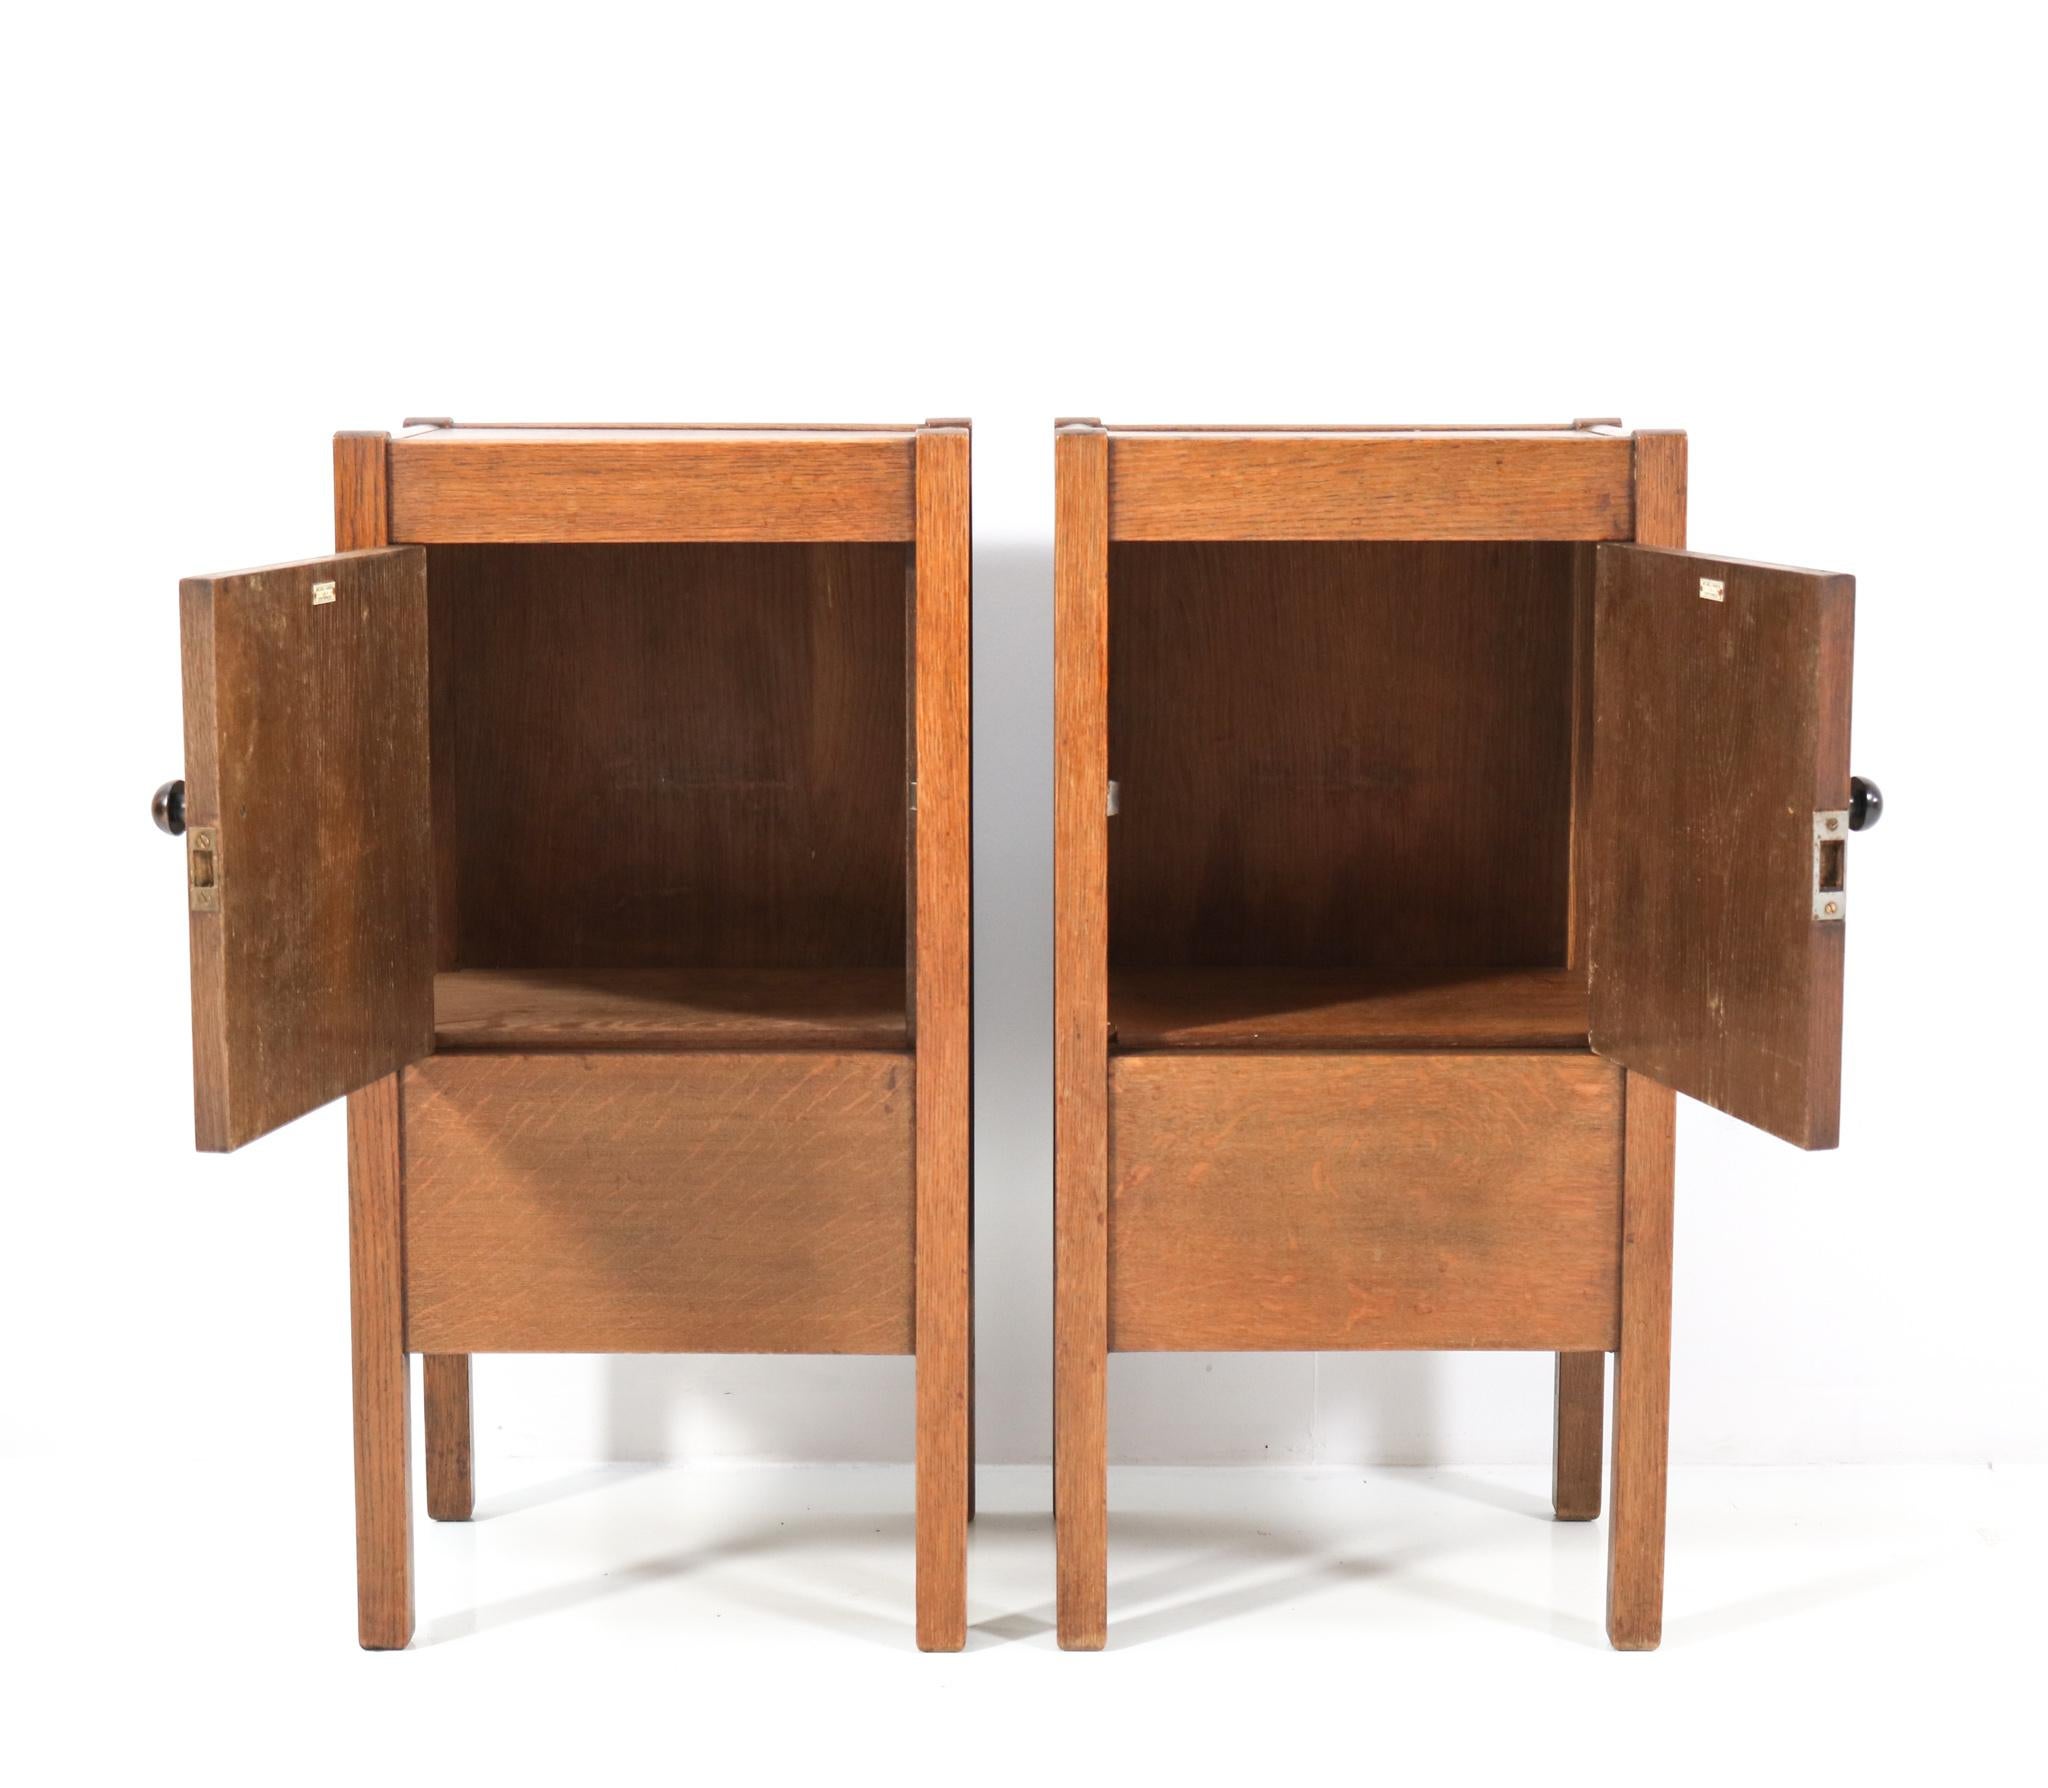 Early 20th Century Two Oak Art Deco Nightstands by J.A. Muntendam for L.O.V. Oosterbeek, 1920s